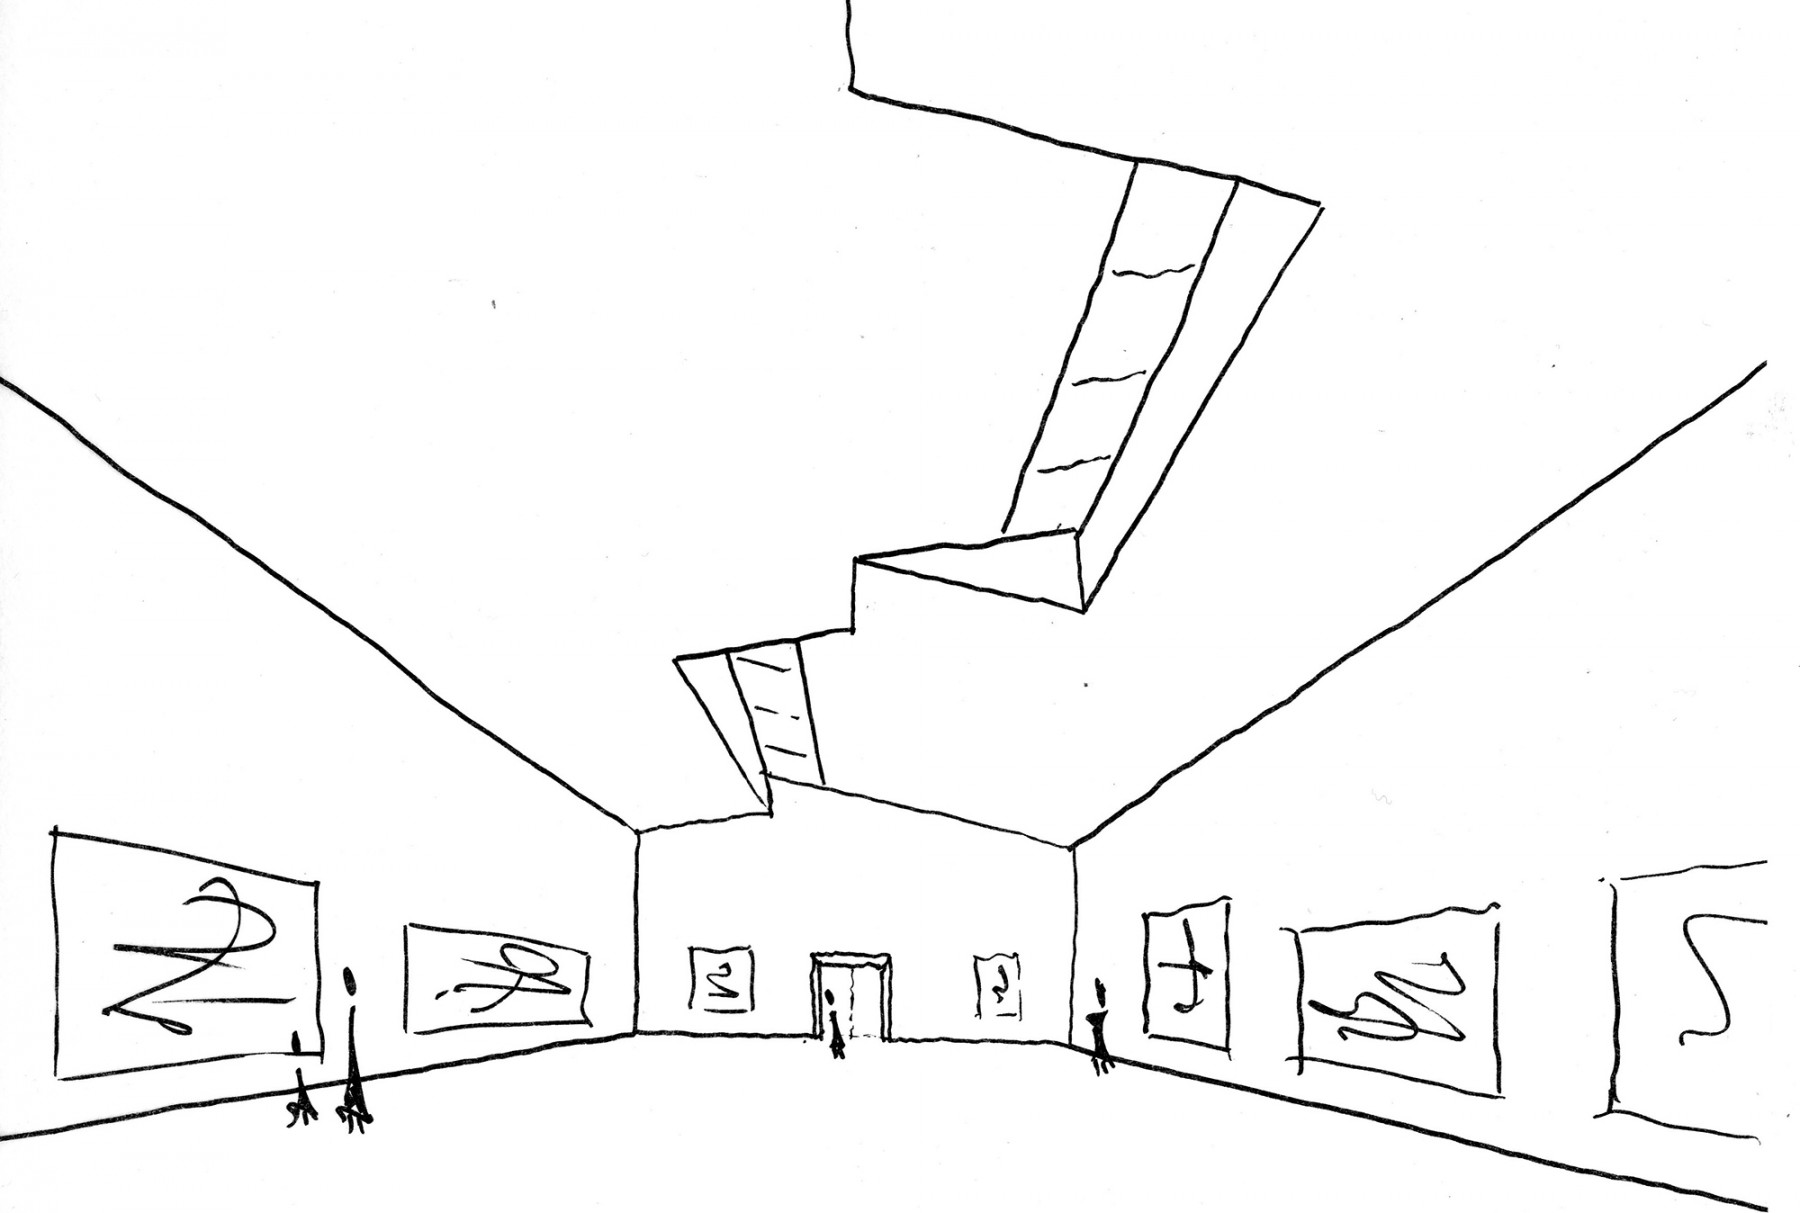 The-Garage-CCC-Moscow-Russia-Art-gallery-centre-contemporary-culture-modern-Daria-Zhukova-Jamie-Fobert-Architects-exhibition-sketch2